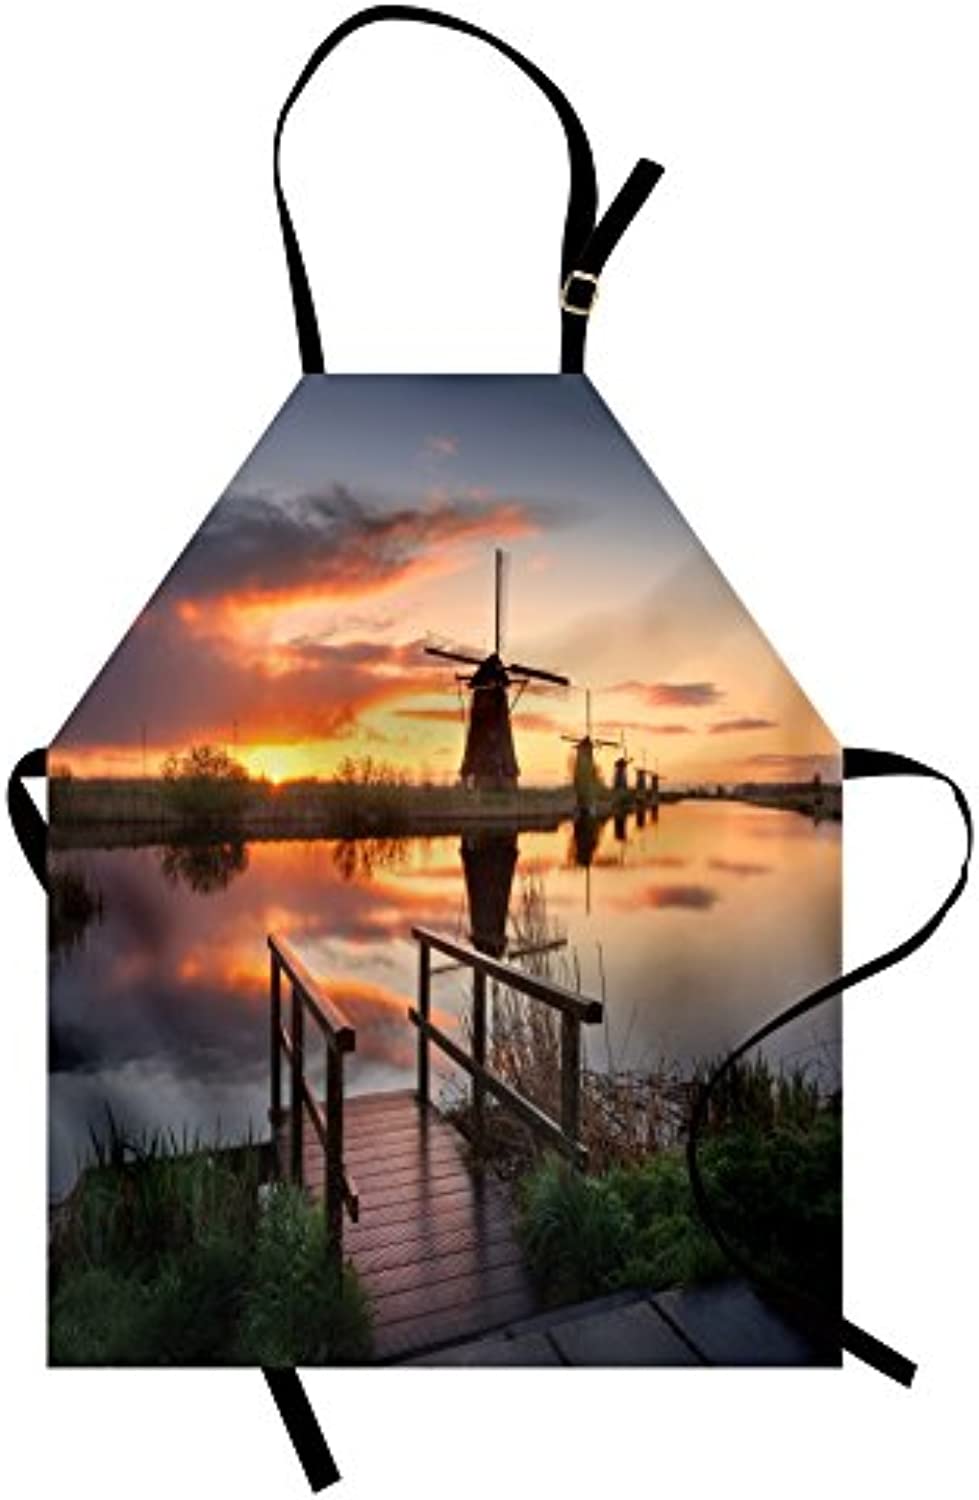 Granbey Nature Apron  Landscape with Traditional Famous Dutch Windmills on Background near Canal Photo  Unisex Kitchen Bib with Adjustable Neck for Cooking Gardening  Adult Size  Orange Blue